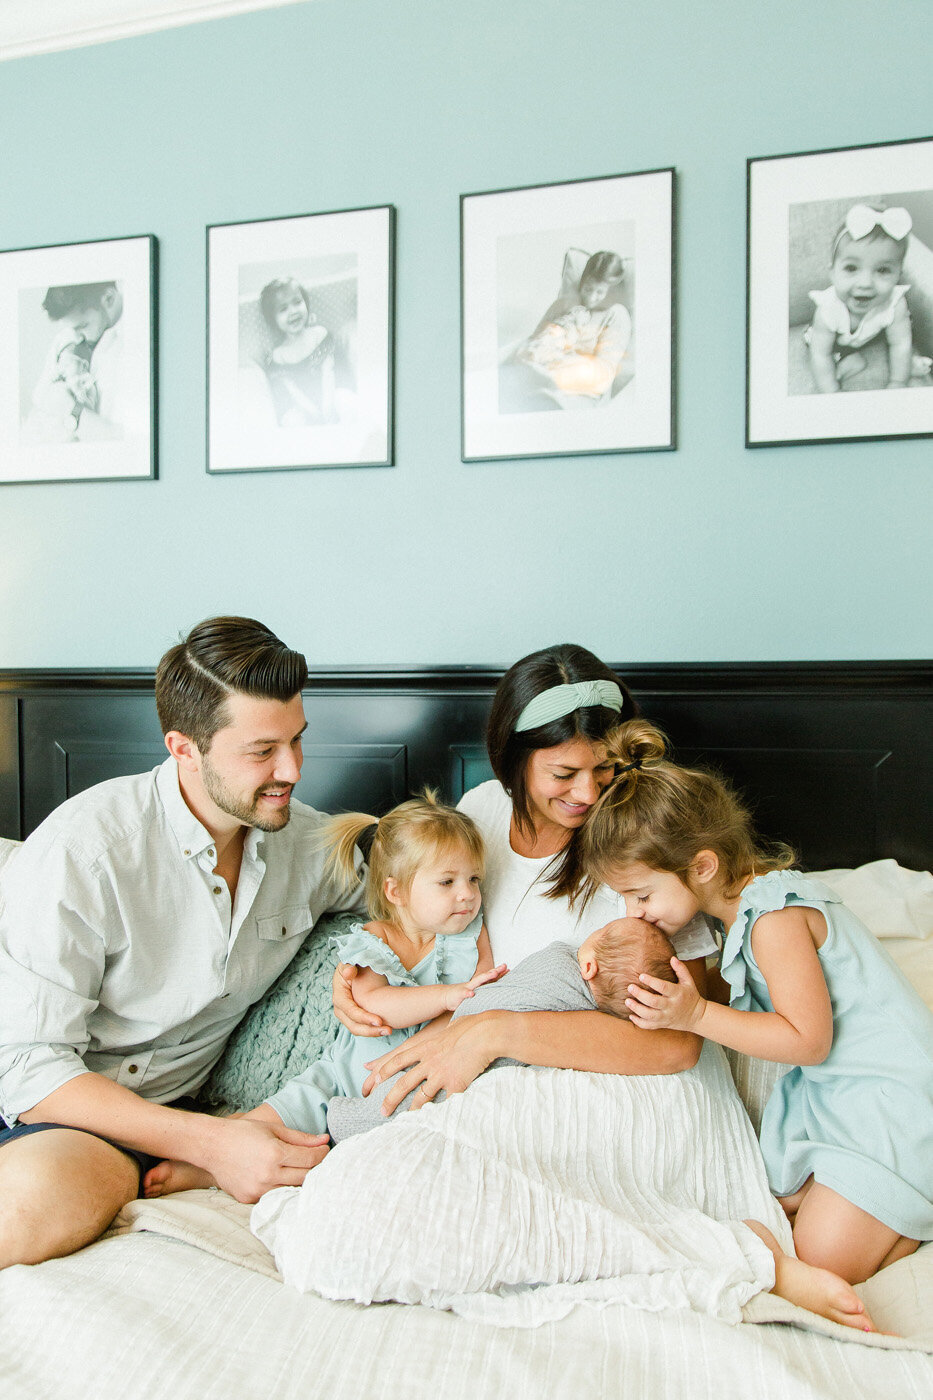 Tampa Family Photographer - Ailyn LaTorre 42